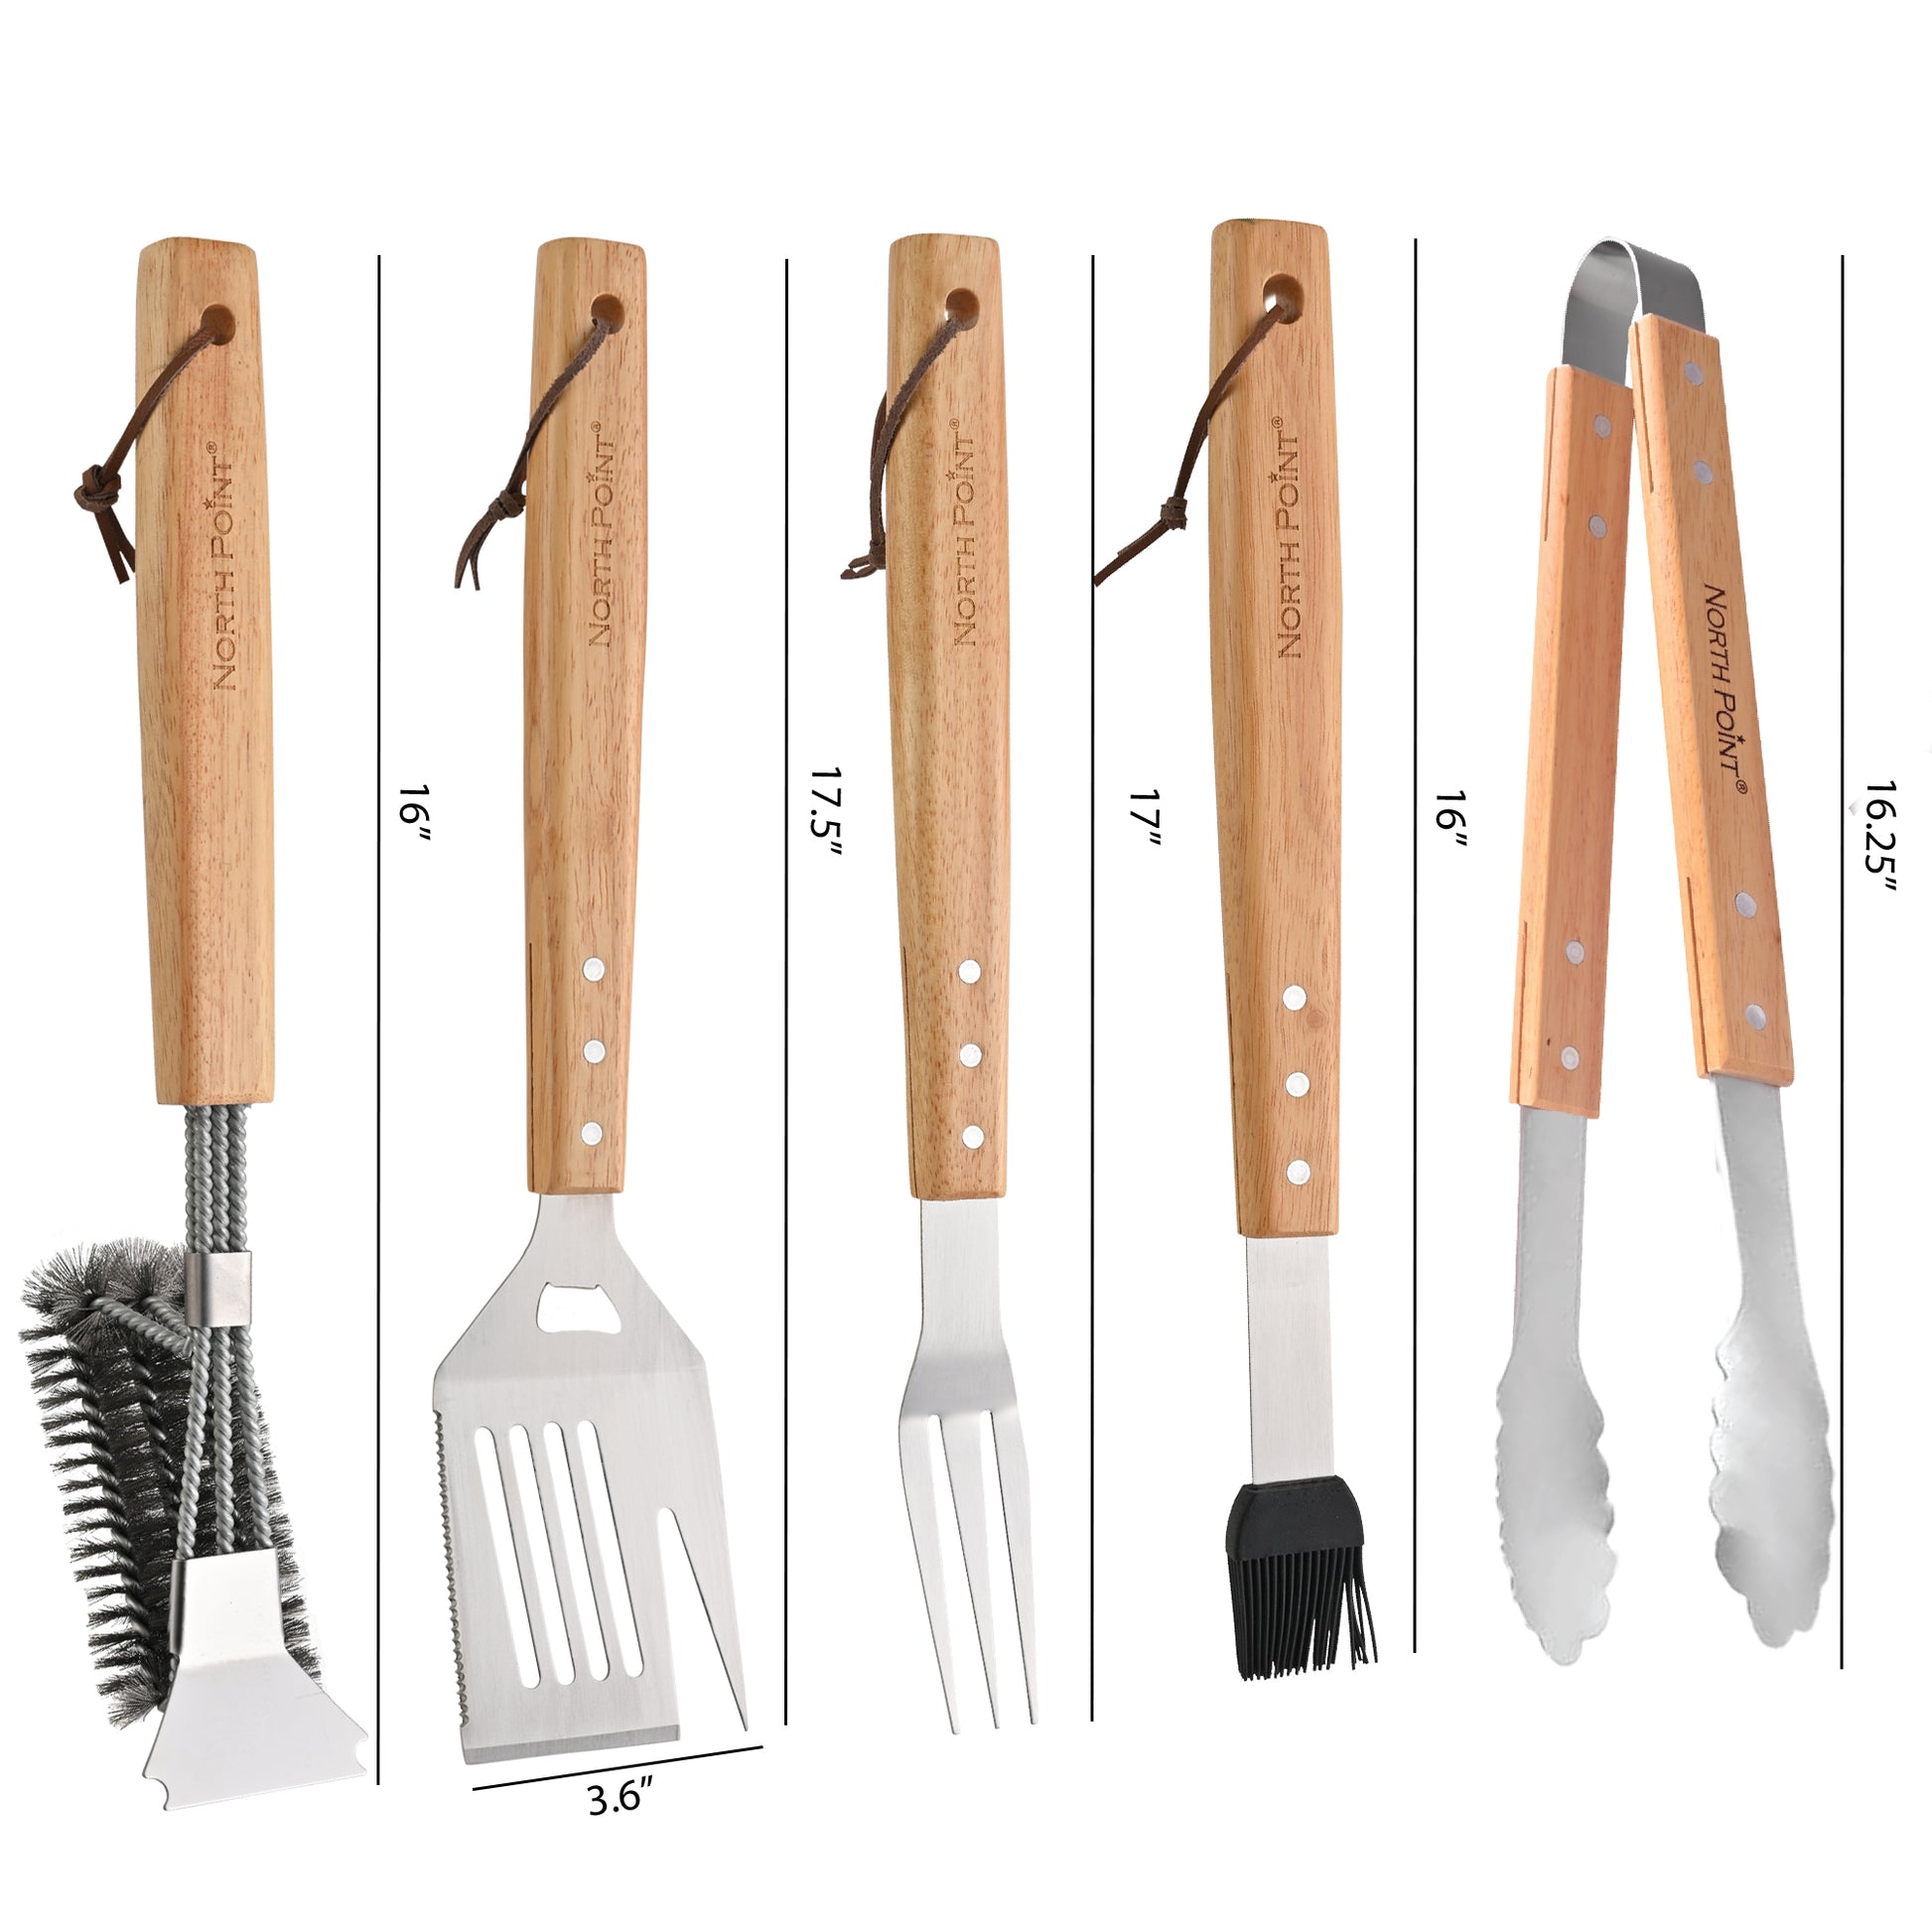 North Point® 5 piece BBQ tool set with 5-in-1 Spatula Size: 17.5″ long, 3.6″ wide, cleaning Brush Size: 16″ long, Fork Size: 17″ long, Basting Brush Size: 16″ long, Tongs Size: 16.25″ long.